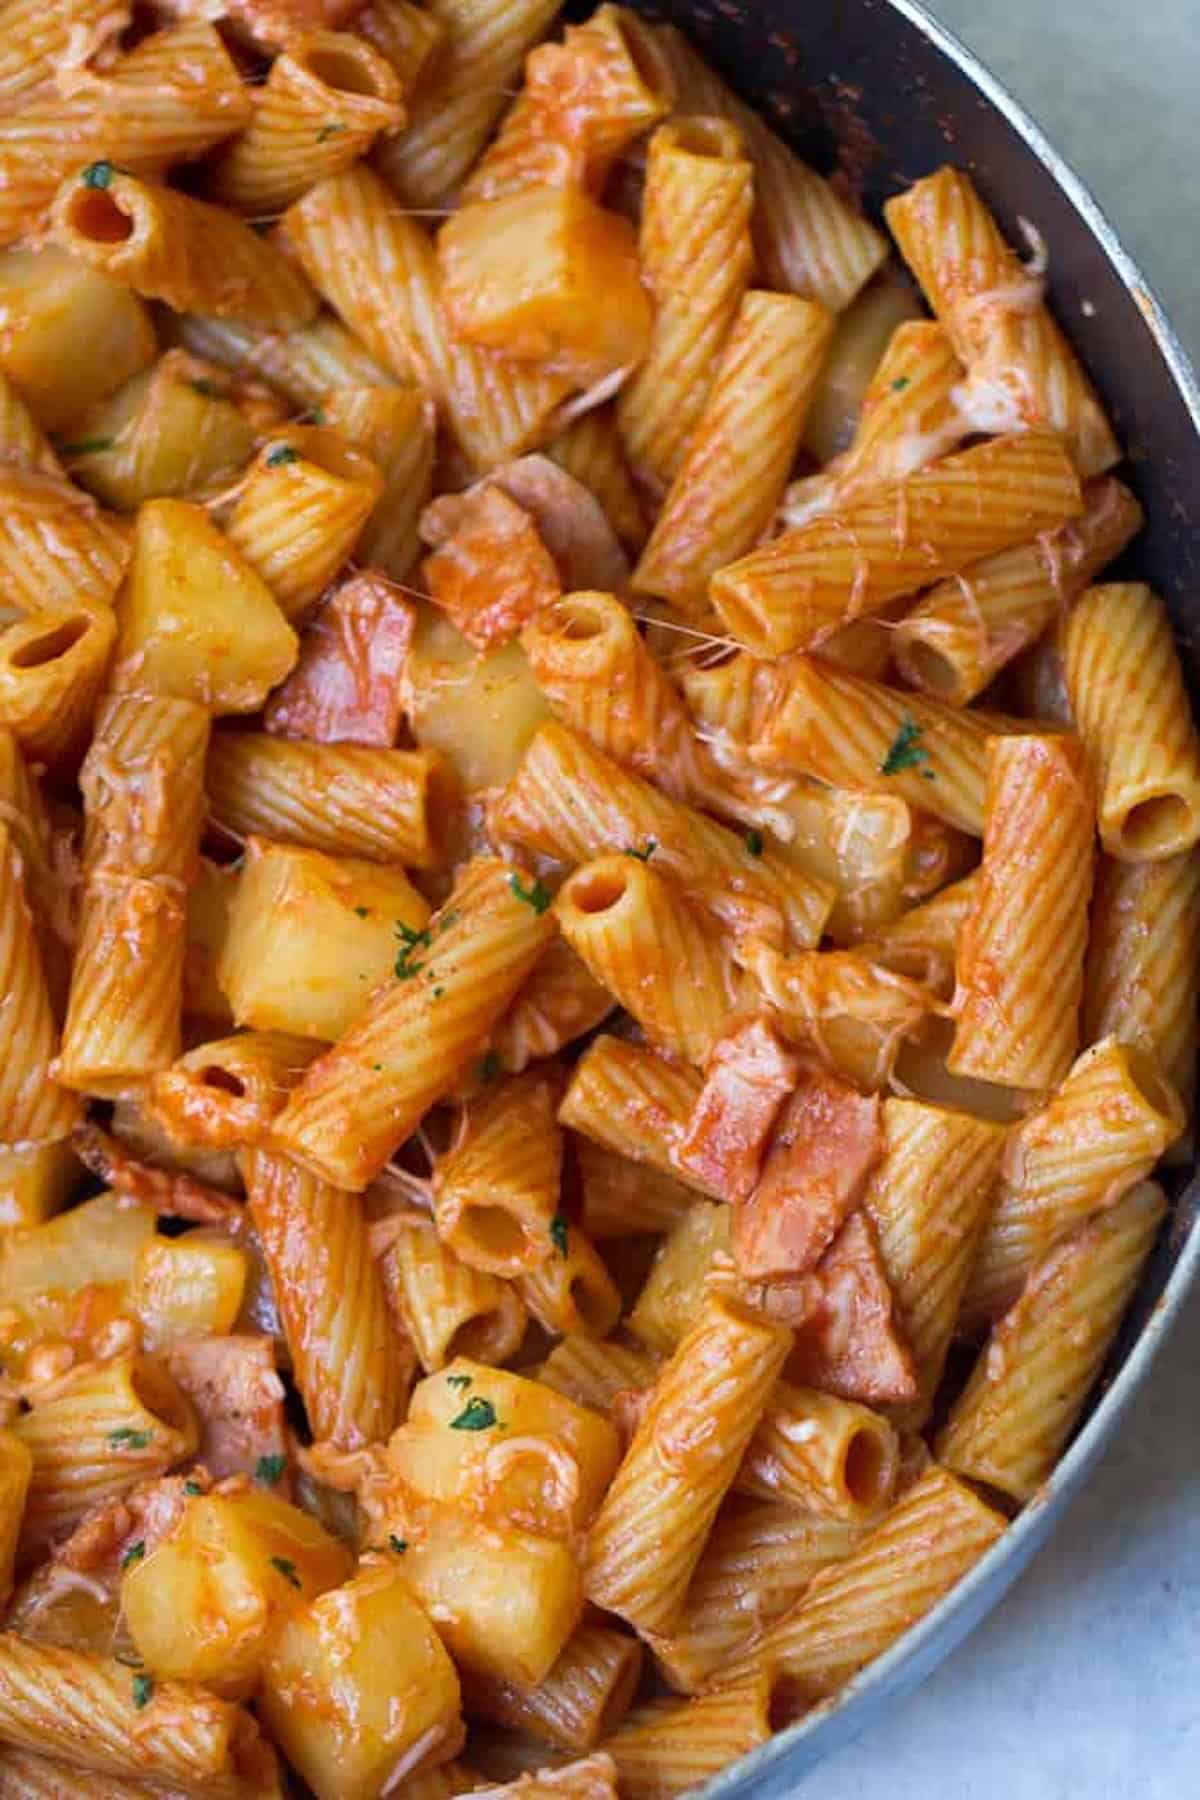 A skillet filled with rigatoni pasta in tomato sauce, mixed with chunks of potatoes and pieces of meat, garnished with bits of herbs.